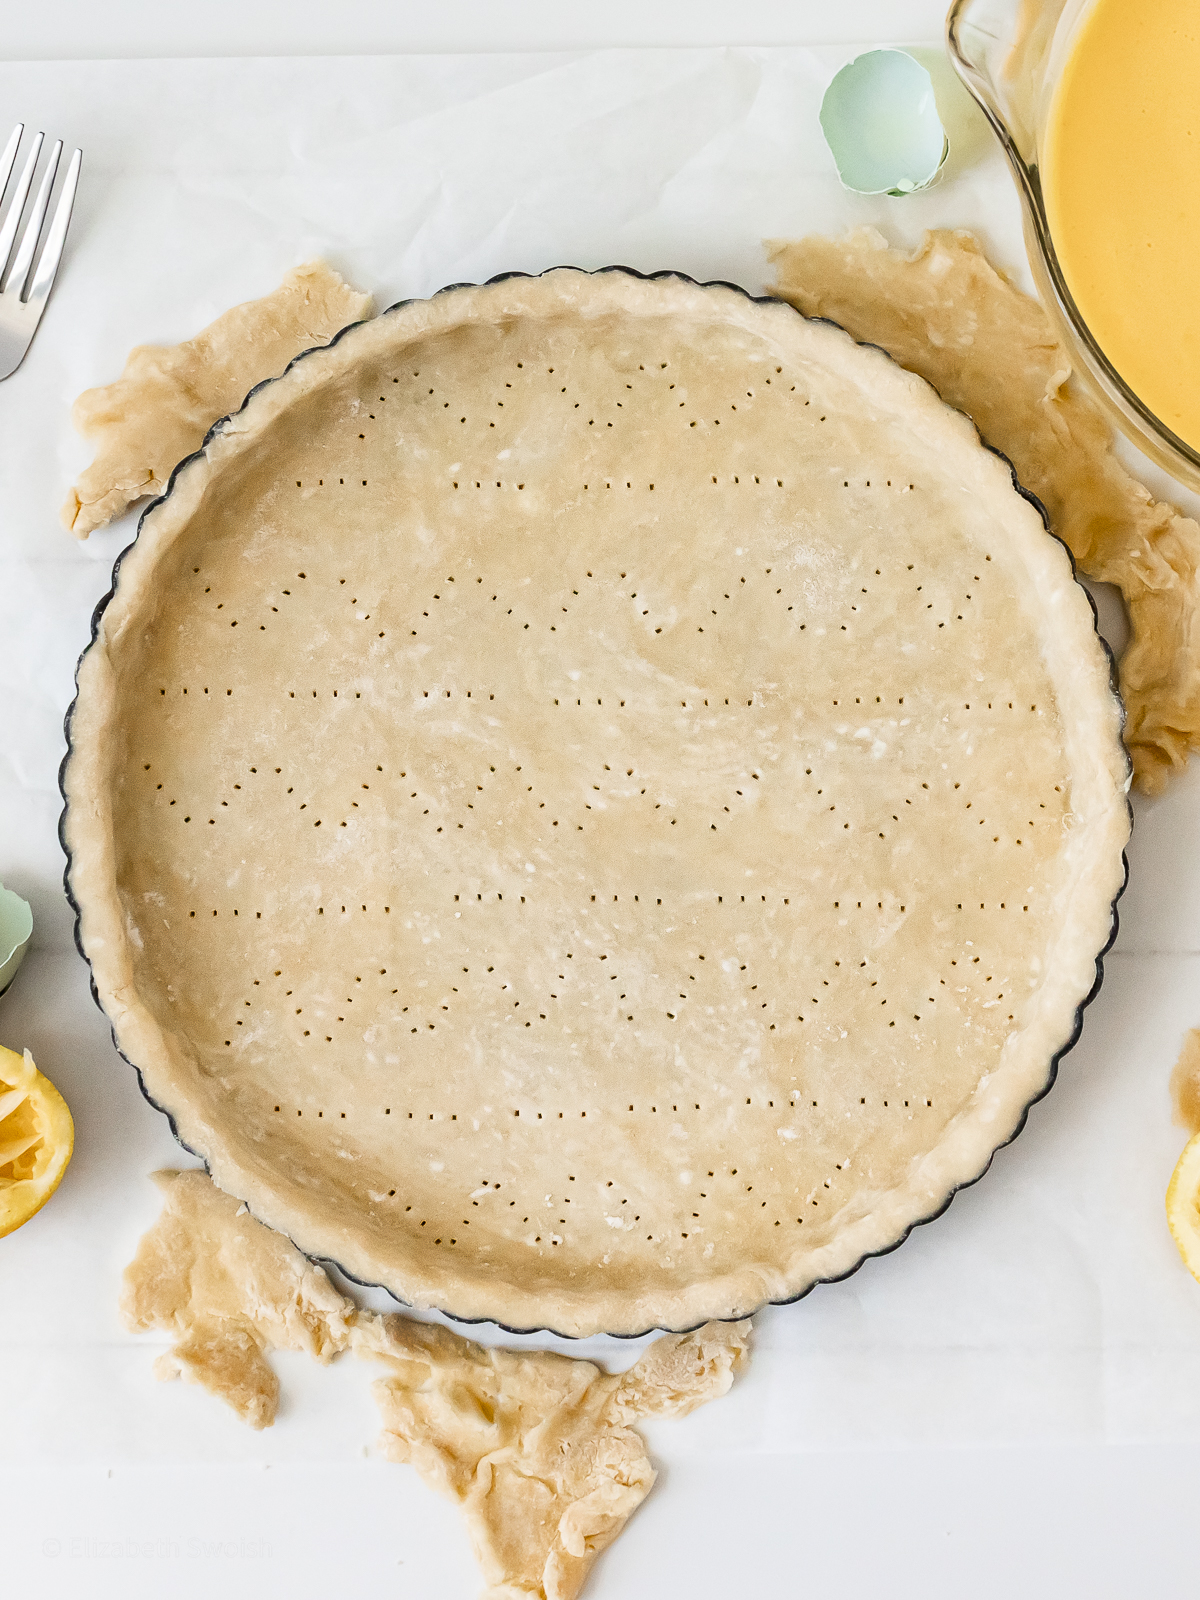 Vodka Pie Crust pressed into a pie plate and ready to par bake and blind bake in the oven.